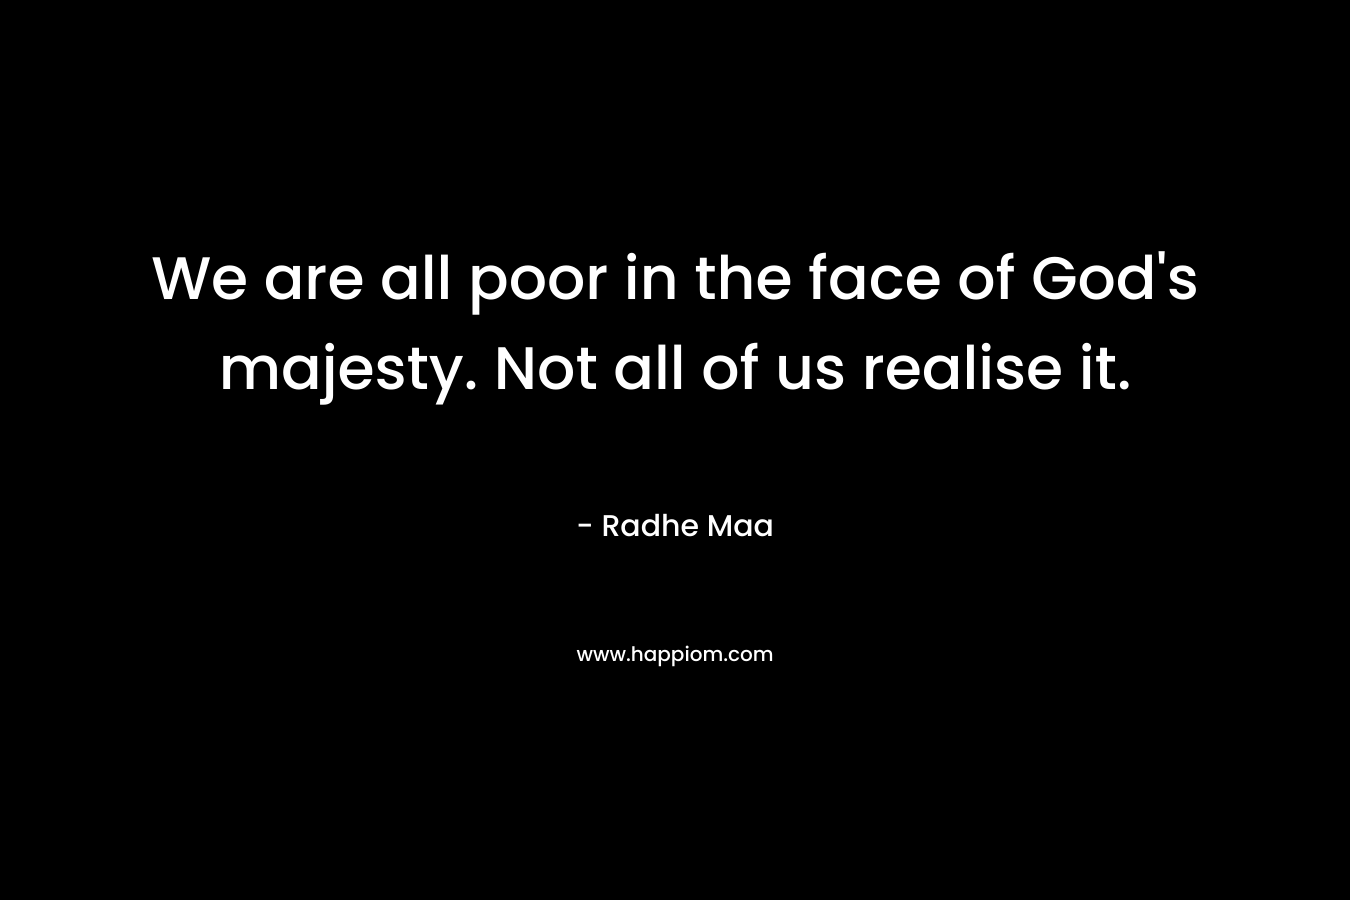 We are all poor in the face of God's majesty. Not all of us realise it.